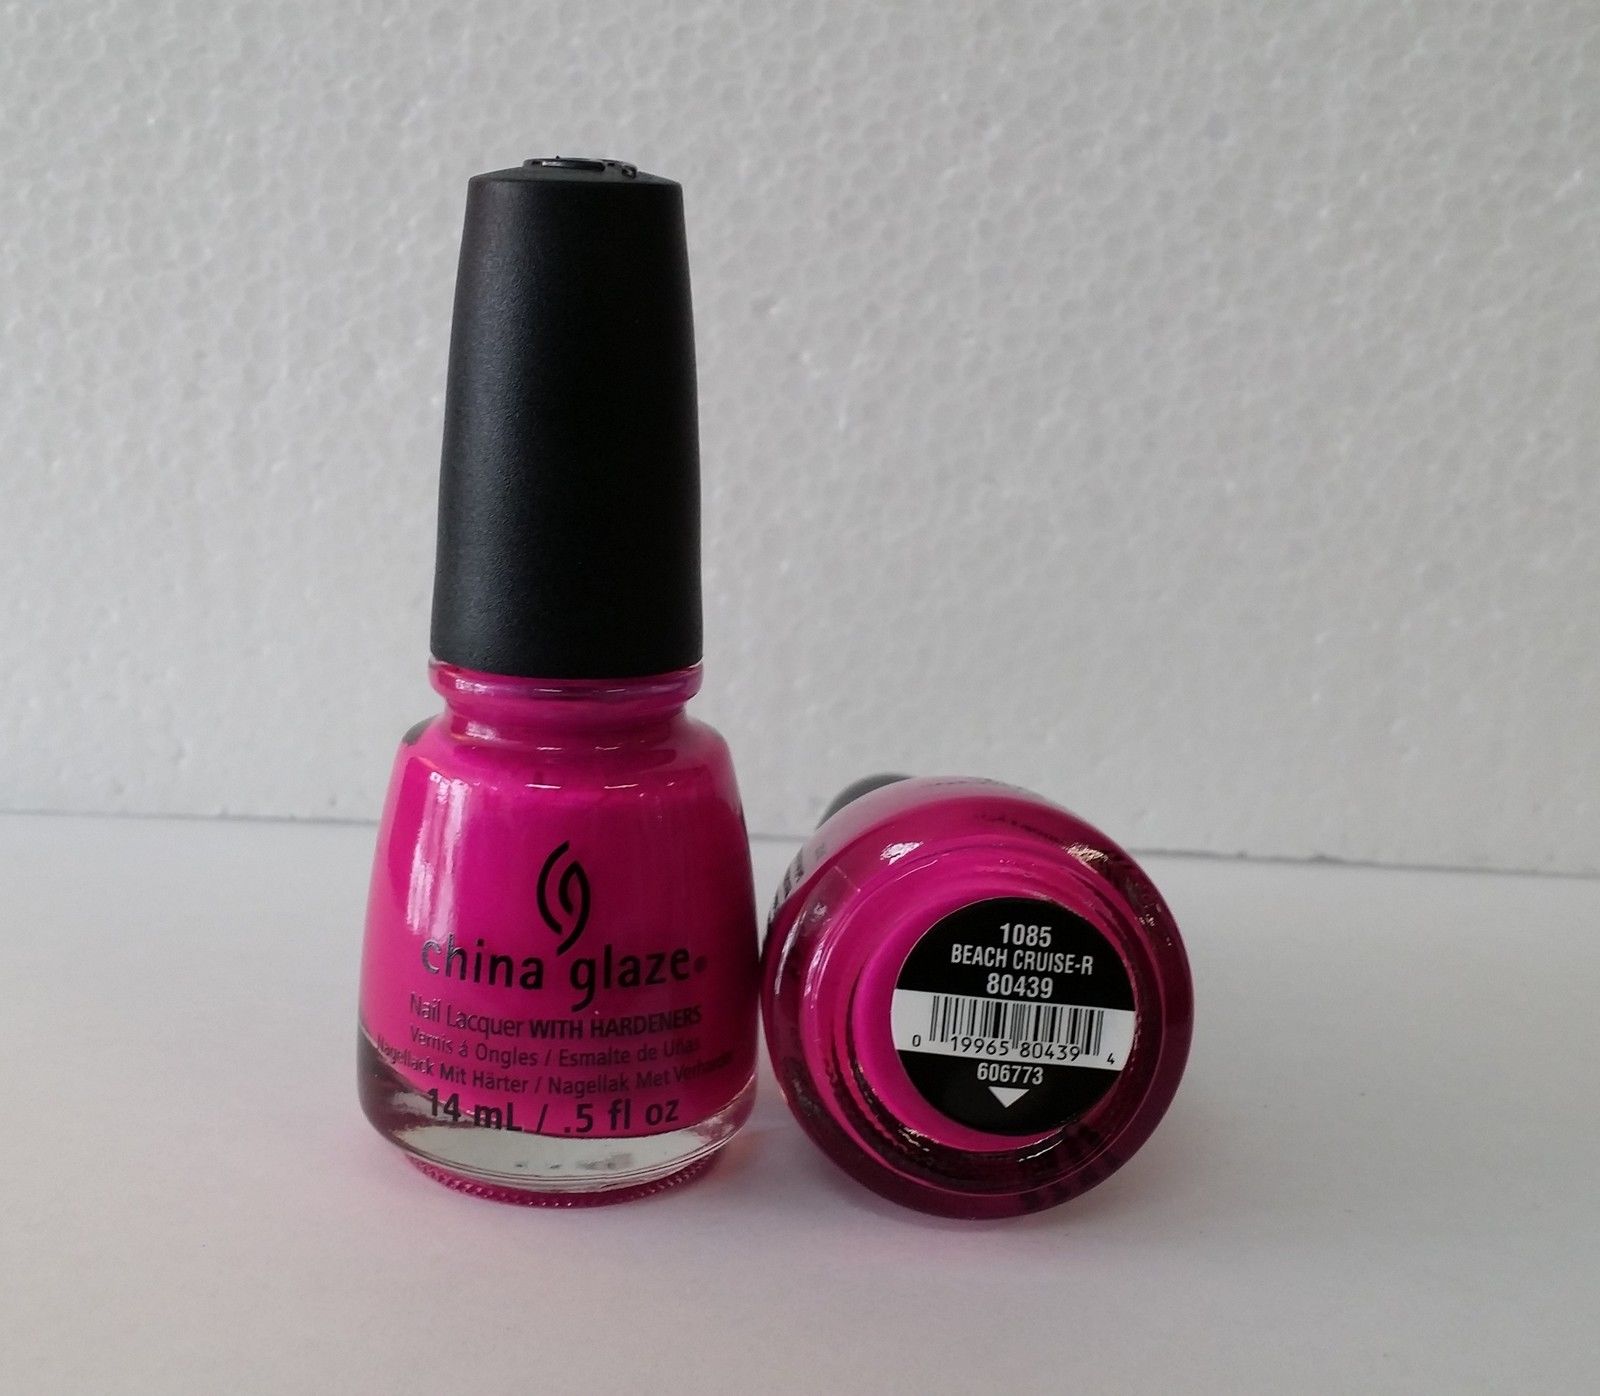 CHINA GLAZE Nail Lacquer with Nail Hardner - Afterglow 